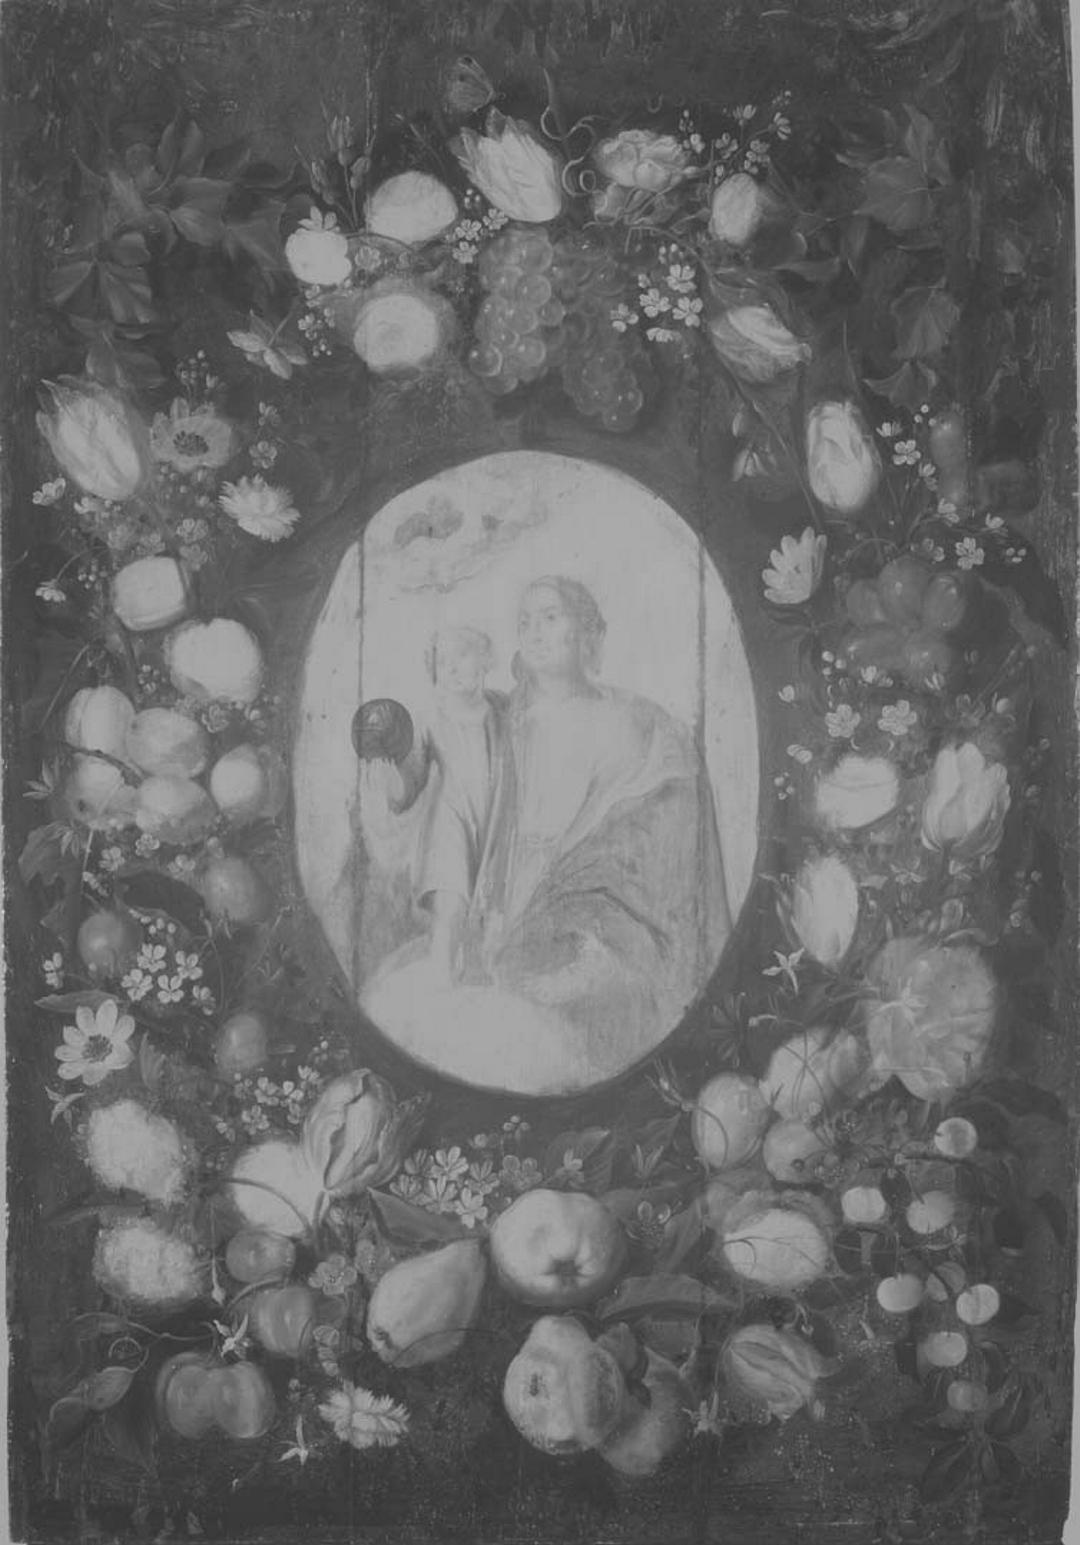 Slider: Near-infrared, Madonna and Child encircled by flowers and fruit DANIELSZ, attrib. to Andries